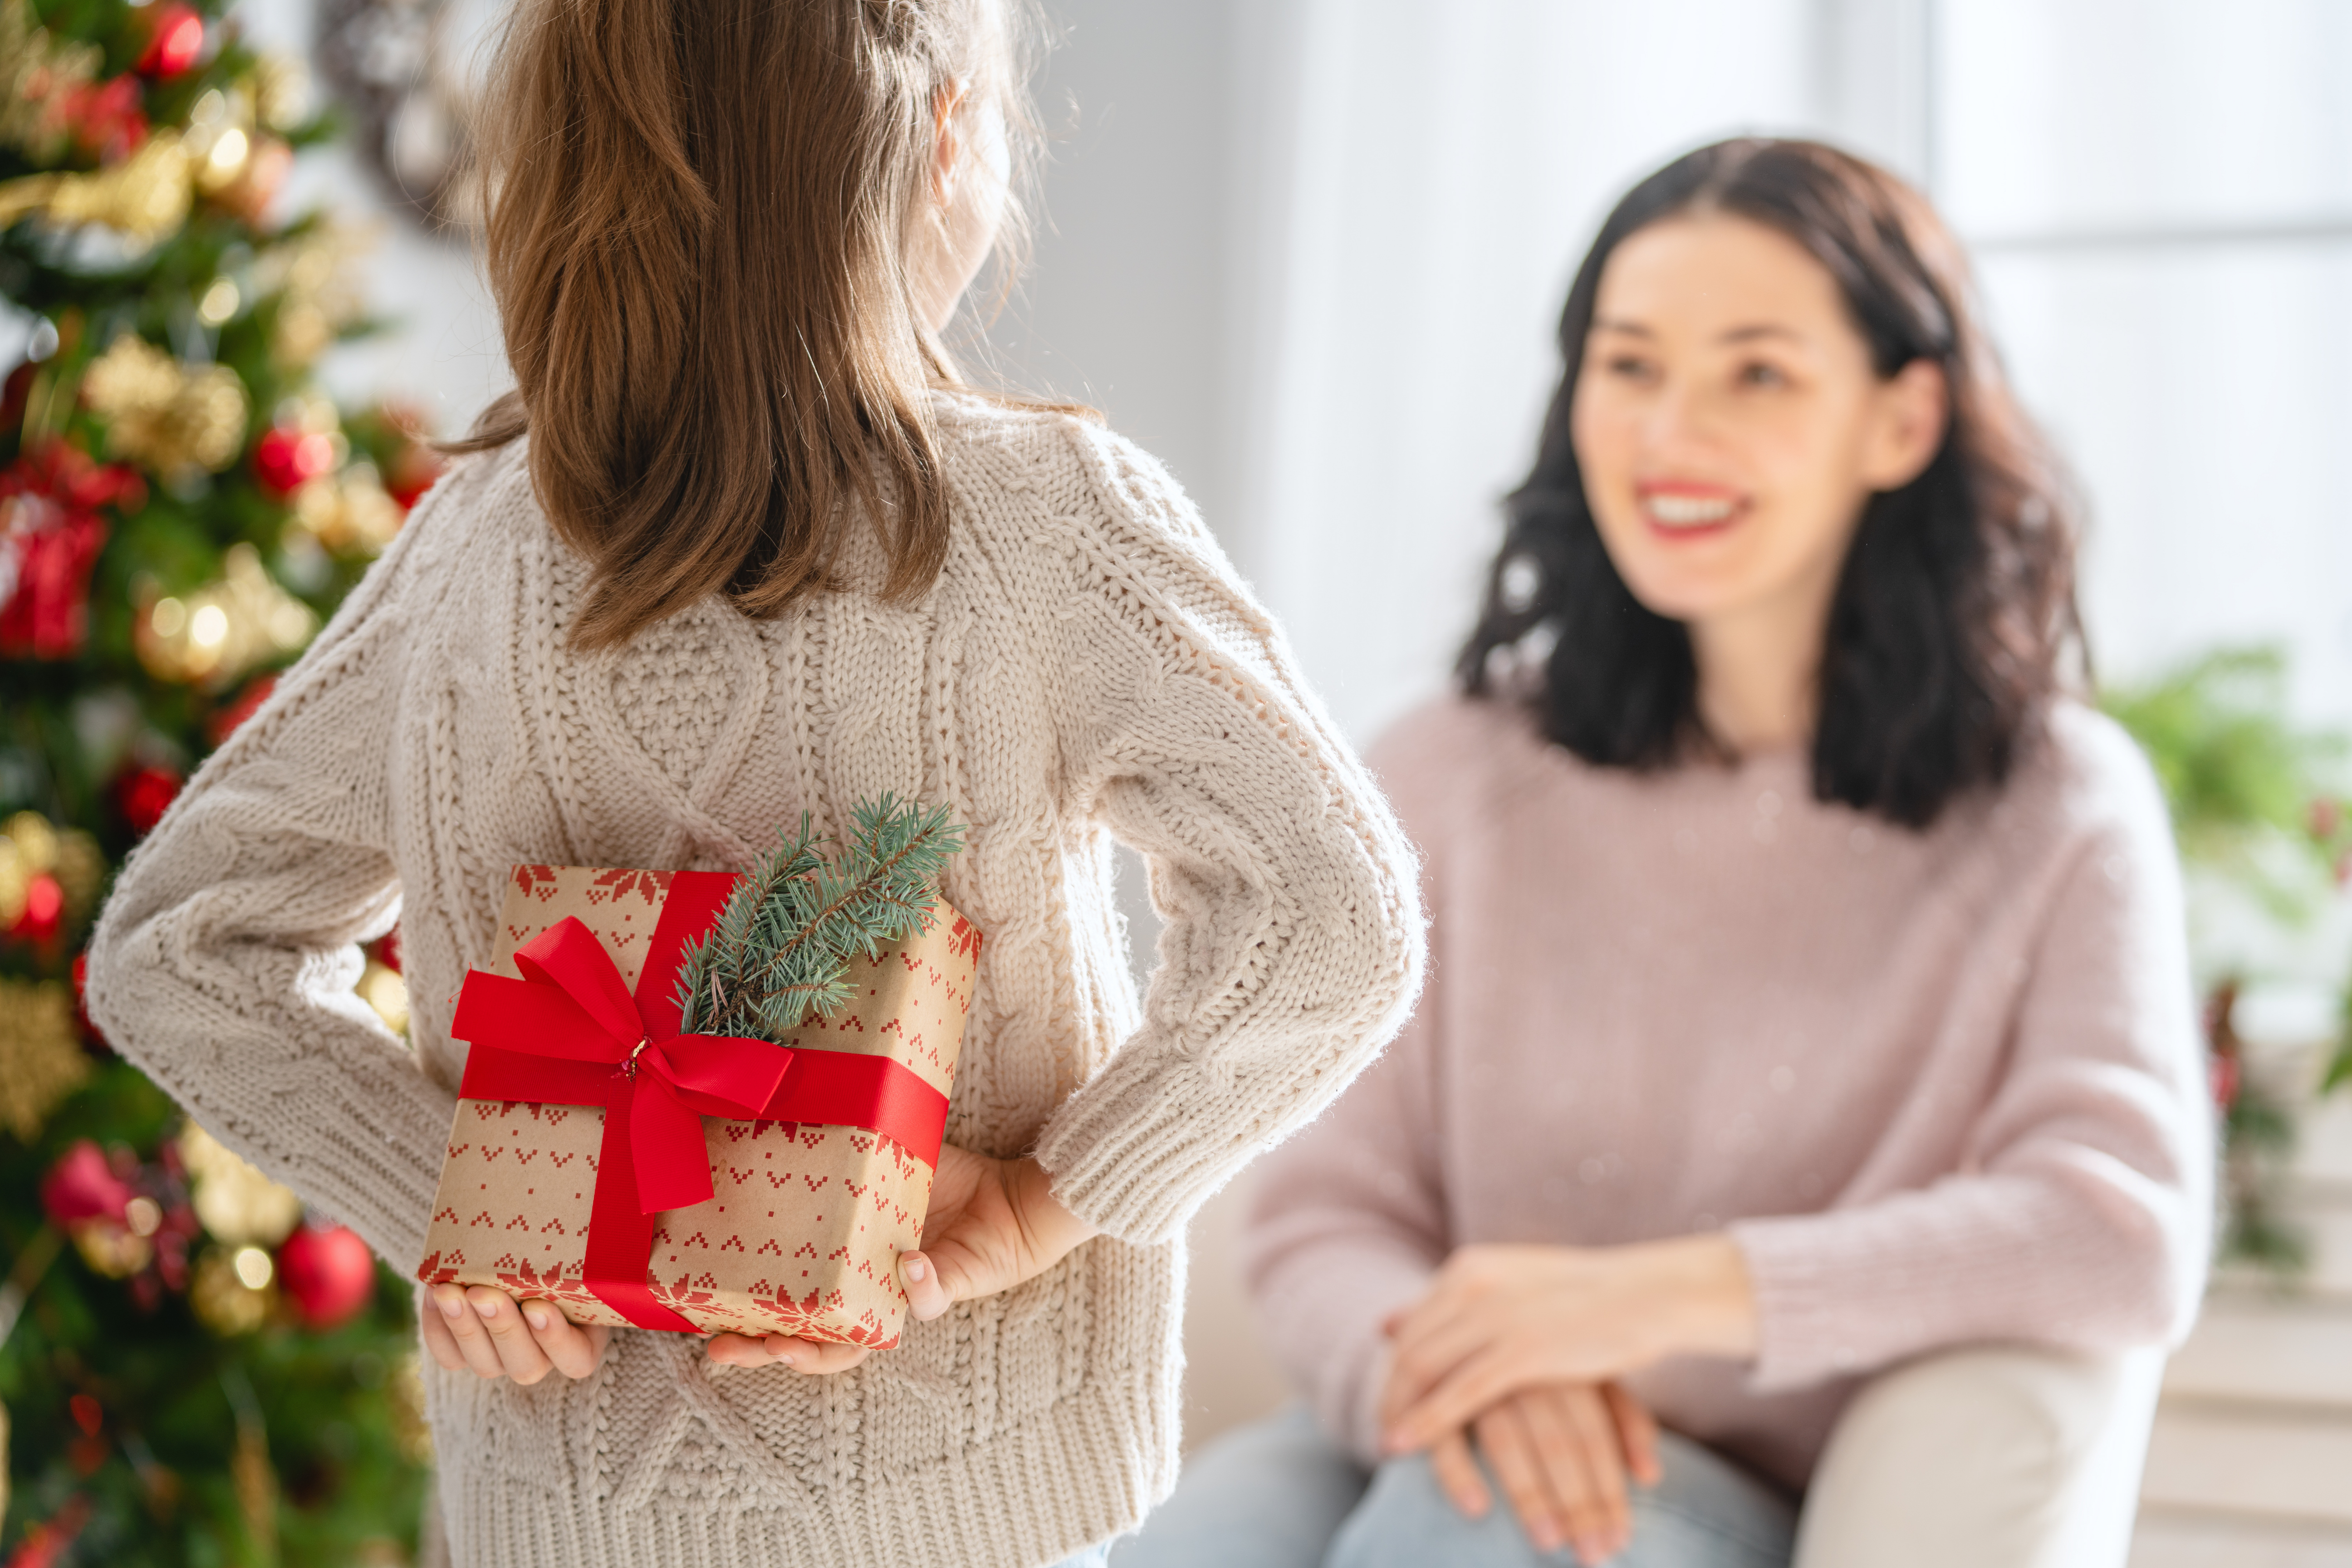 5 Ways to Thank Your Caregiver During the Holidays